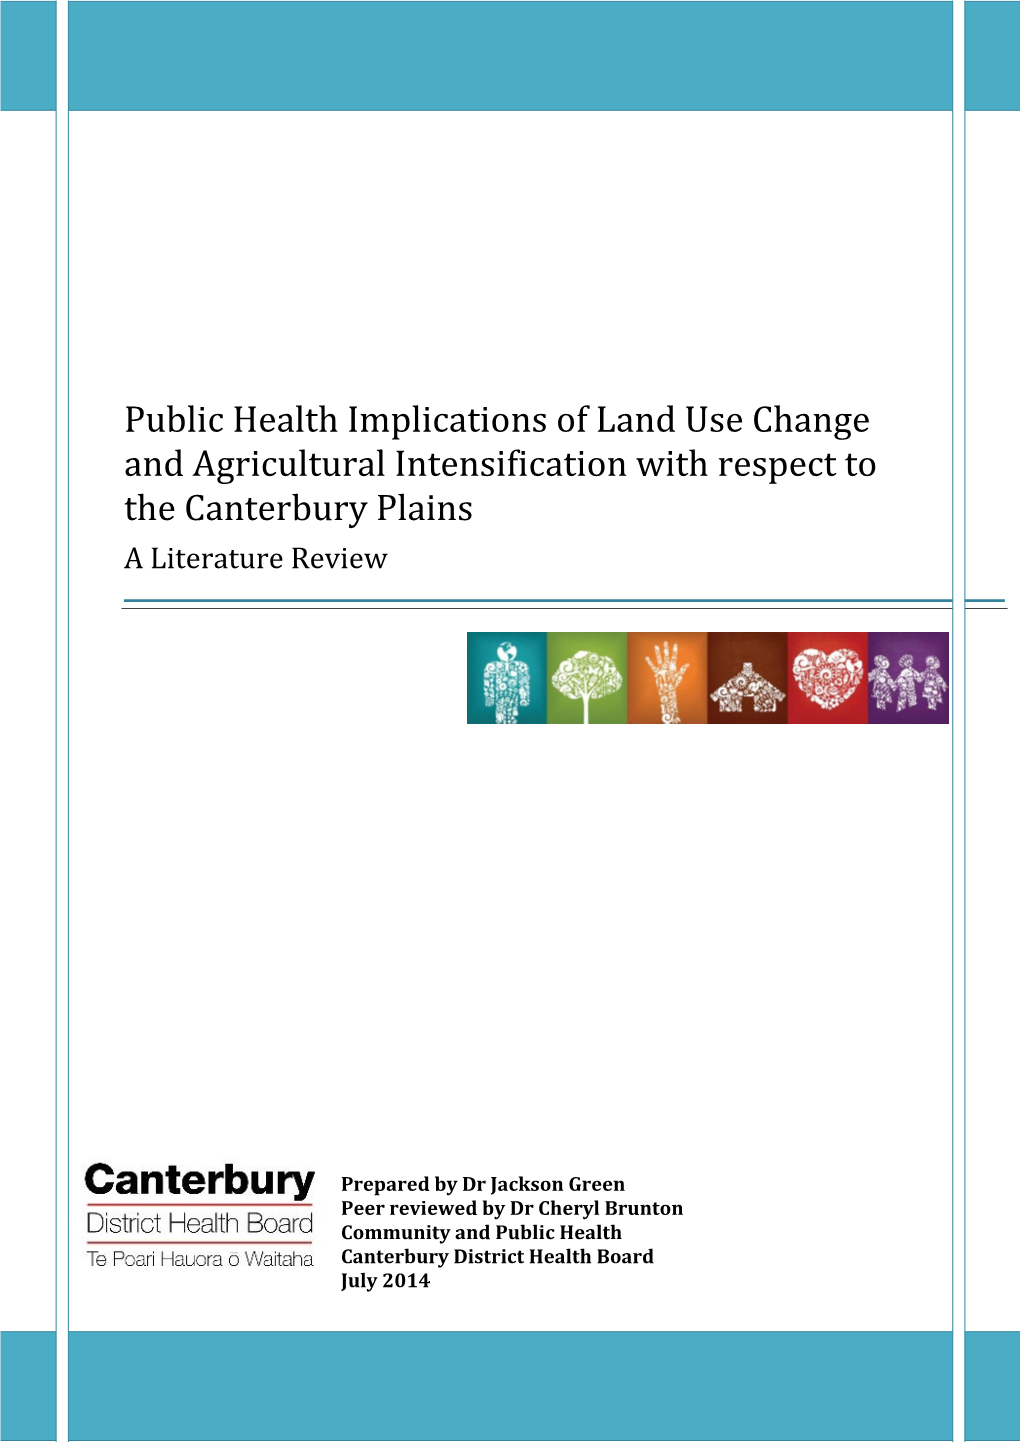 Public Health Implications of Land Use Change and Agricultural Intensification with Respect to the Canterbury Plains a Literature Review